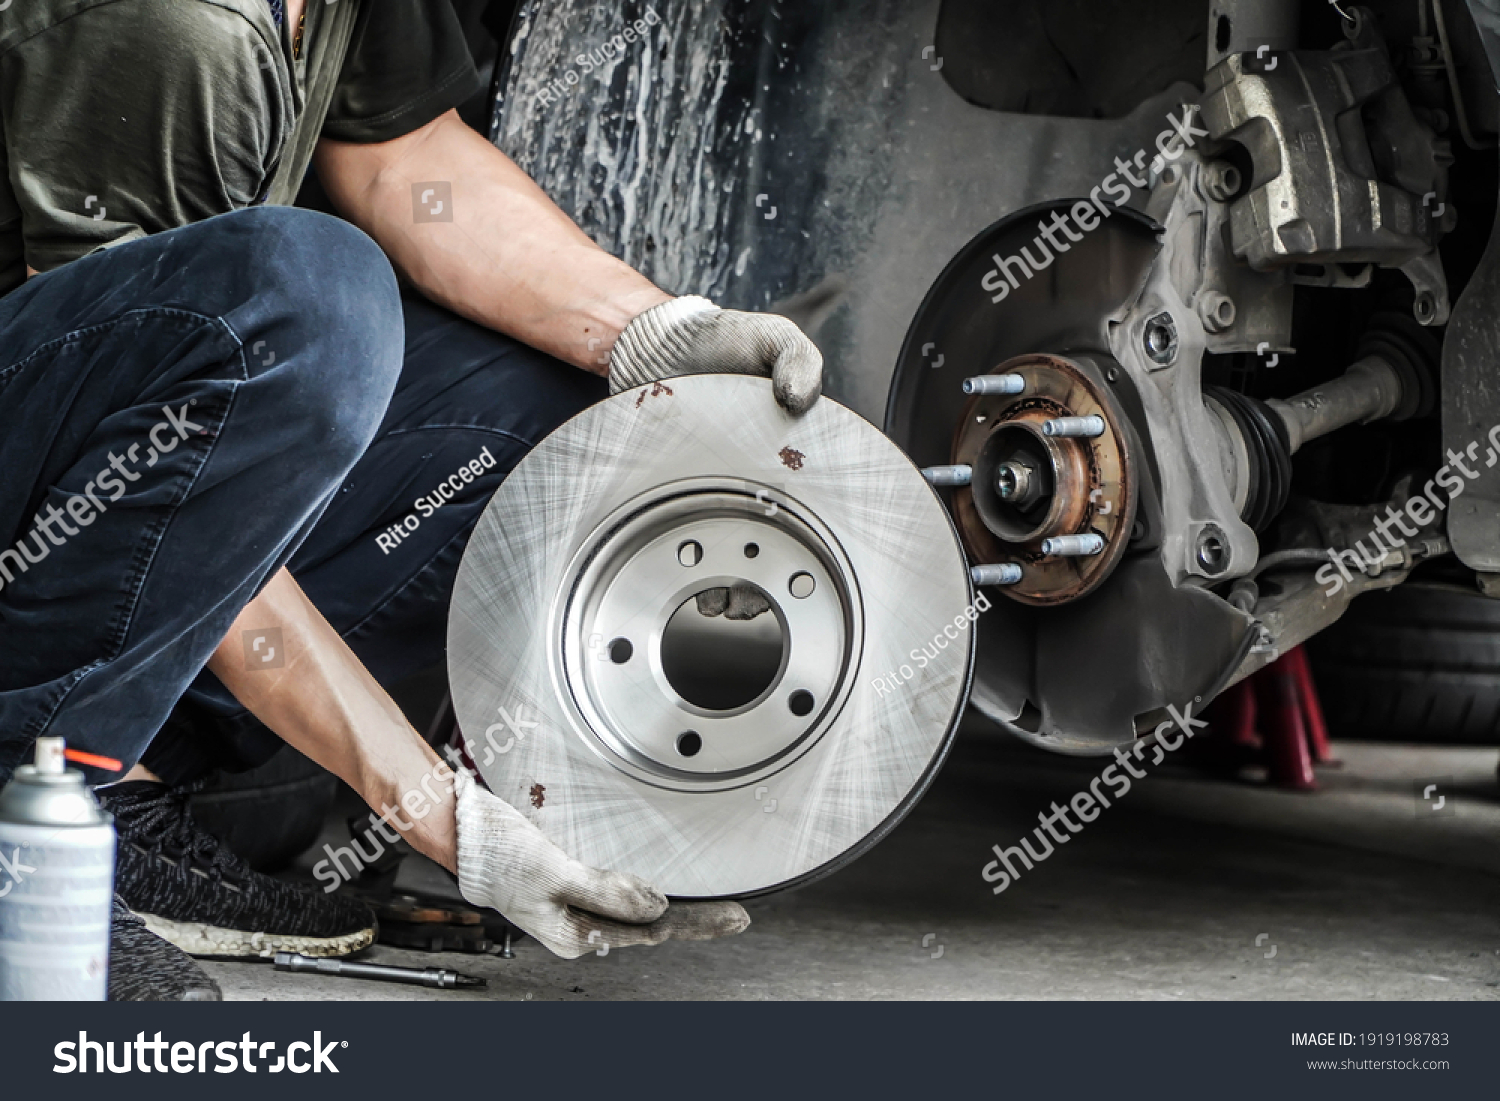 Brand new brake discs for garage cars. Auto mechanic,in process of new tire replacement, Car brake repairing in garage	 #1919198783